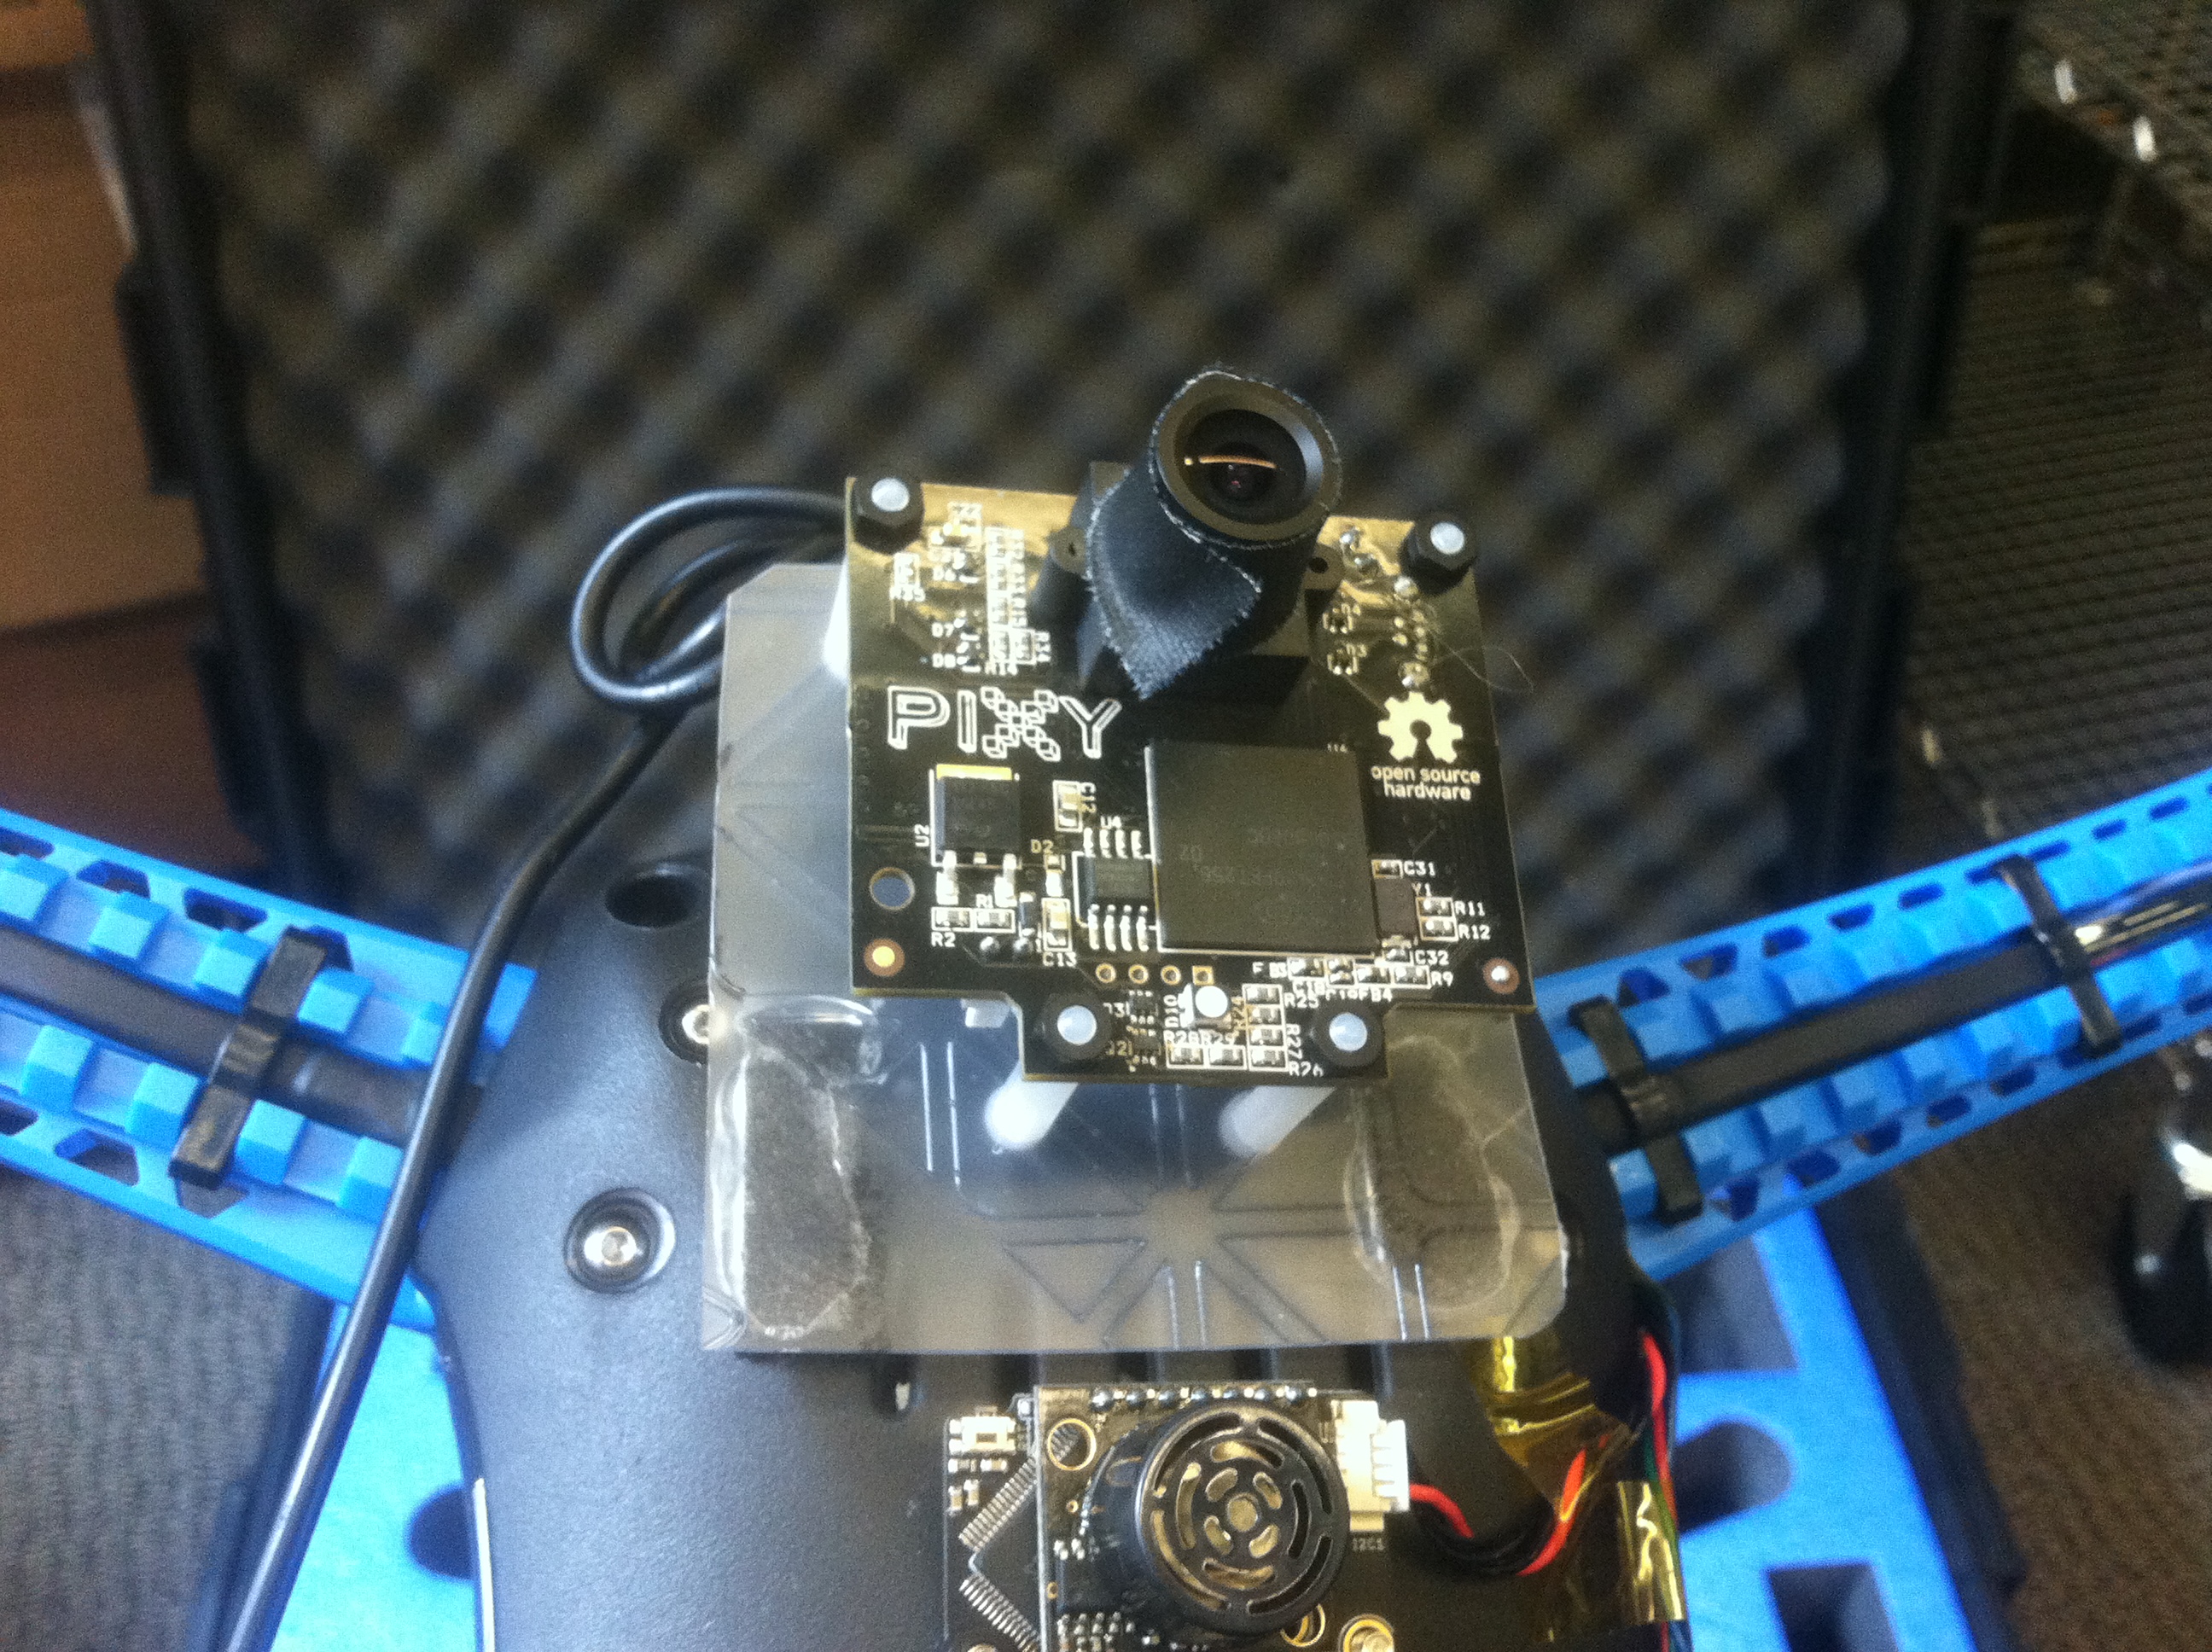 Pixy cam mounting: bottom view